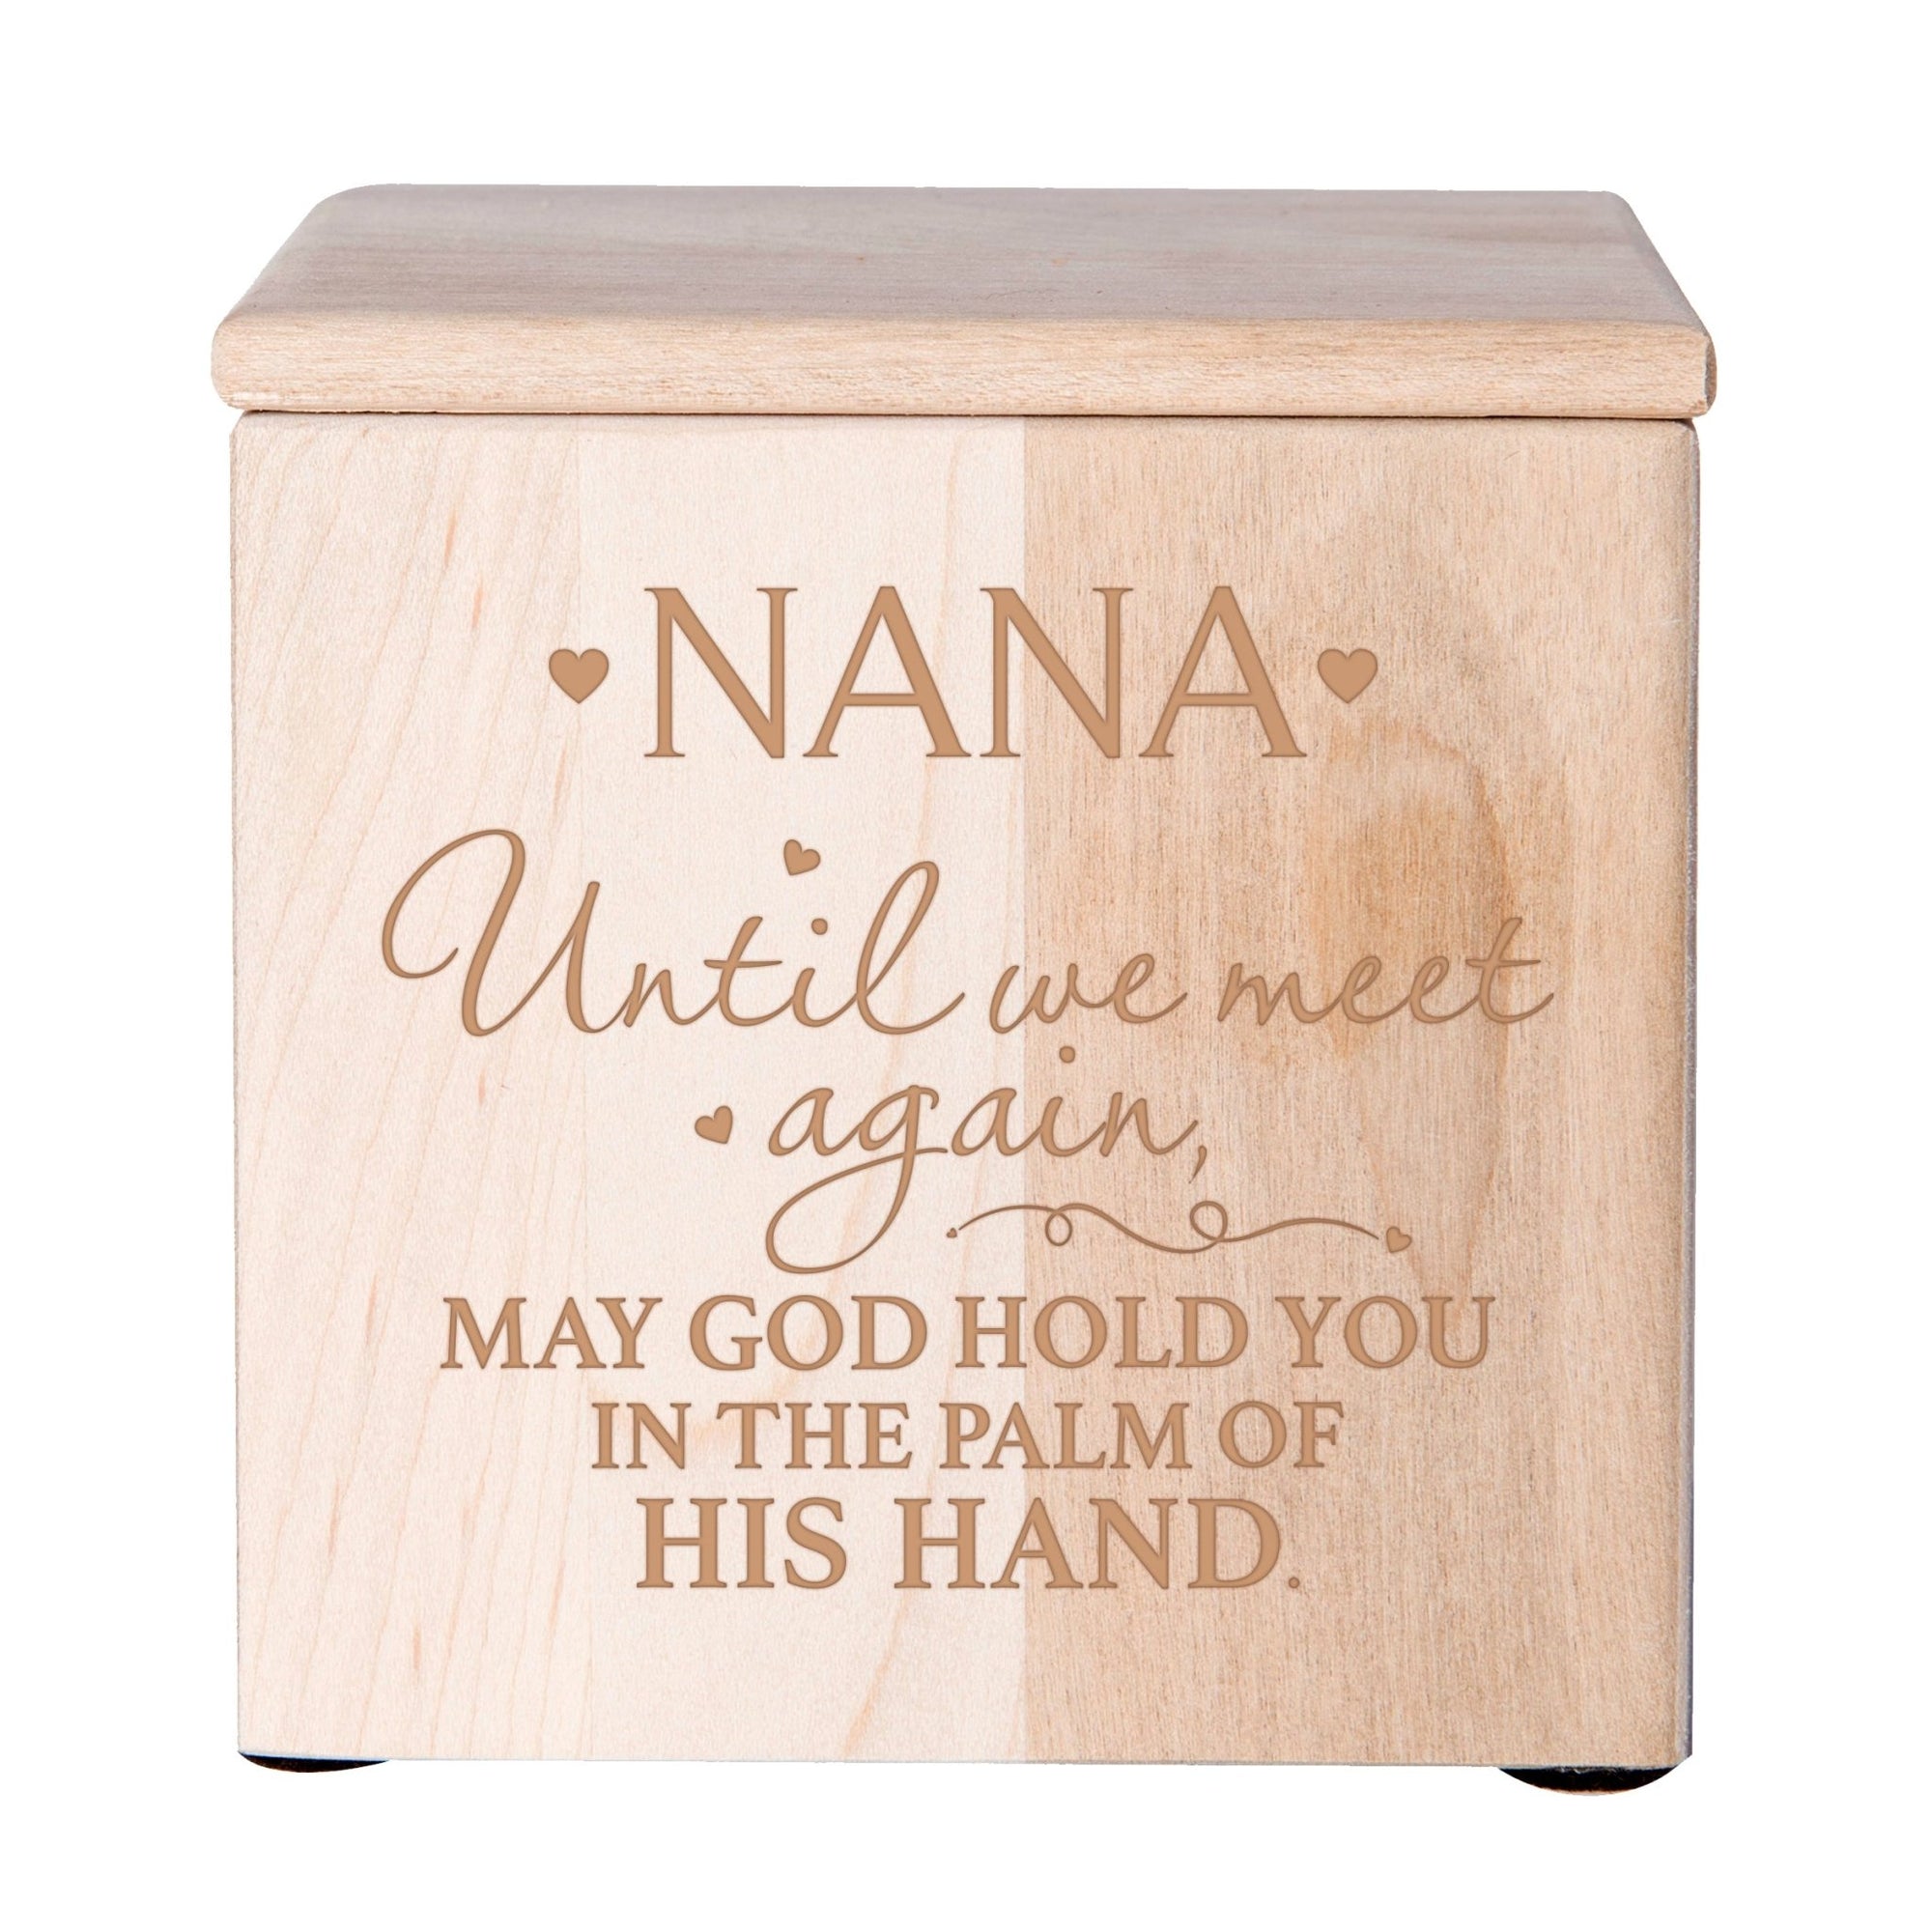 Modern Inspirational Memorial Wooden Cremation Urn Box 4.5x4.5in Holds 49 Cu Inches Of Human Ashes (Until We Meet Again Nana) Funeral and Commemorative Keepsake - LifeSong Milestones